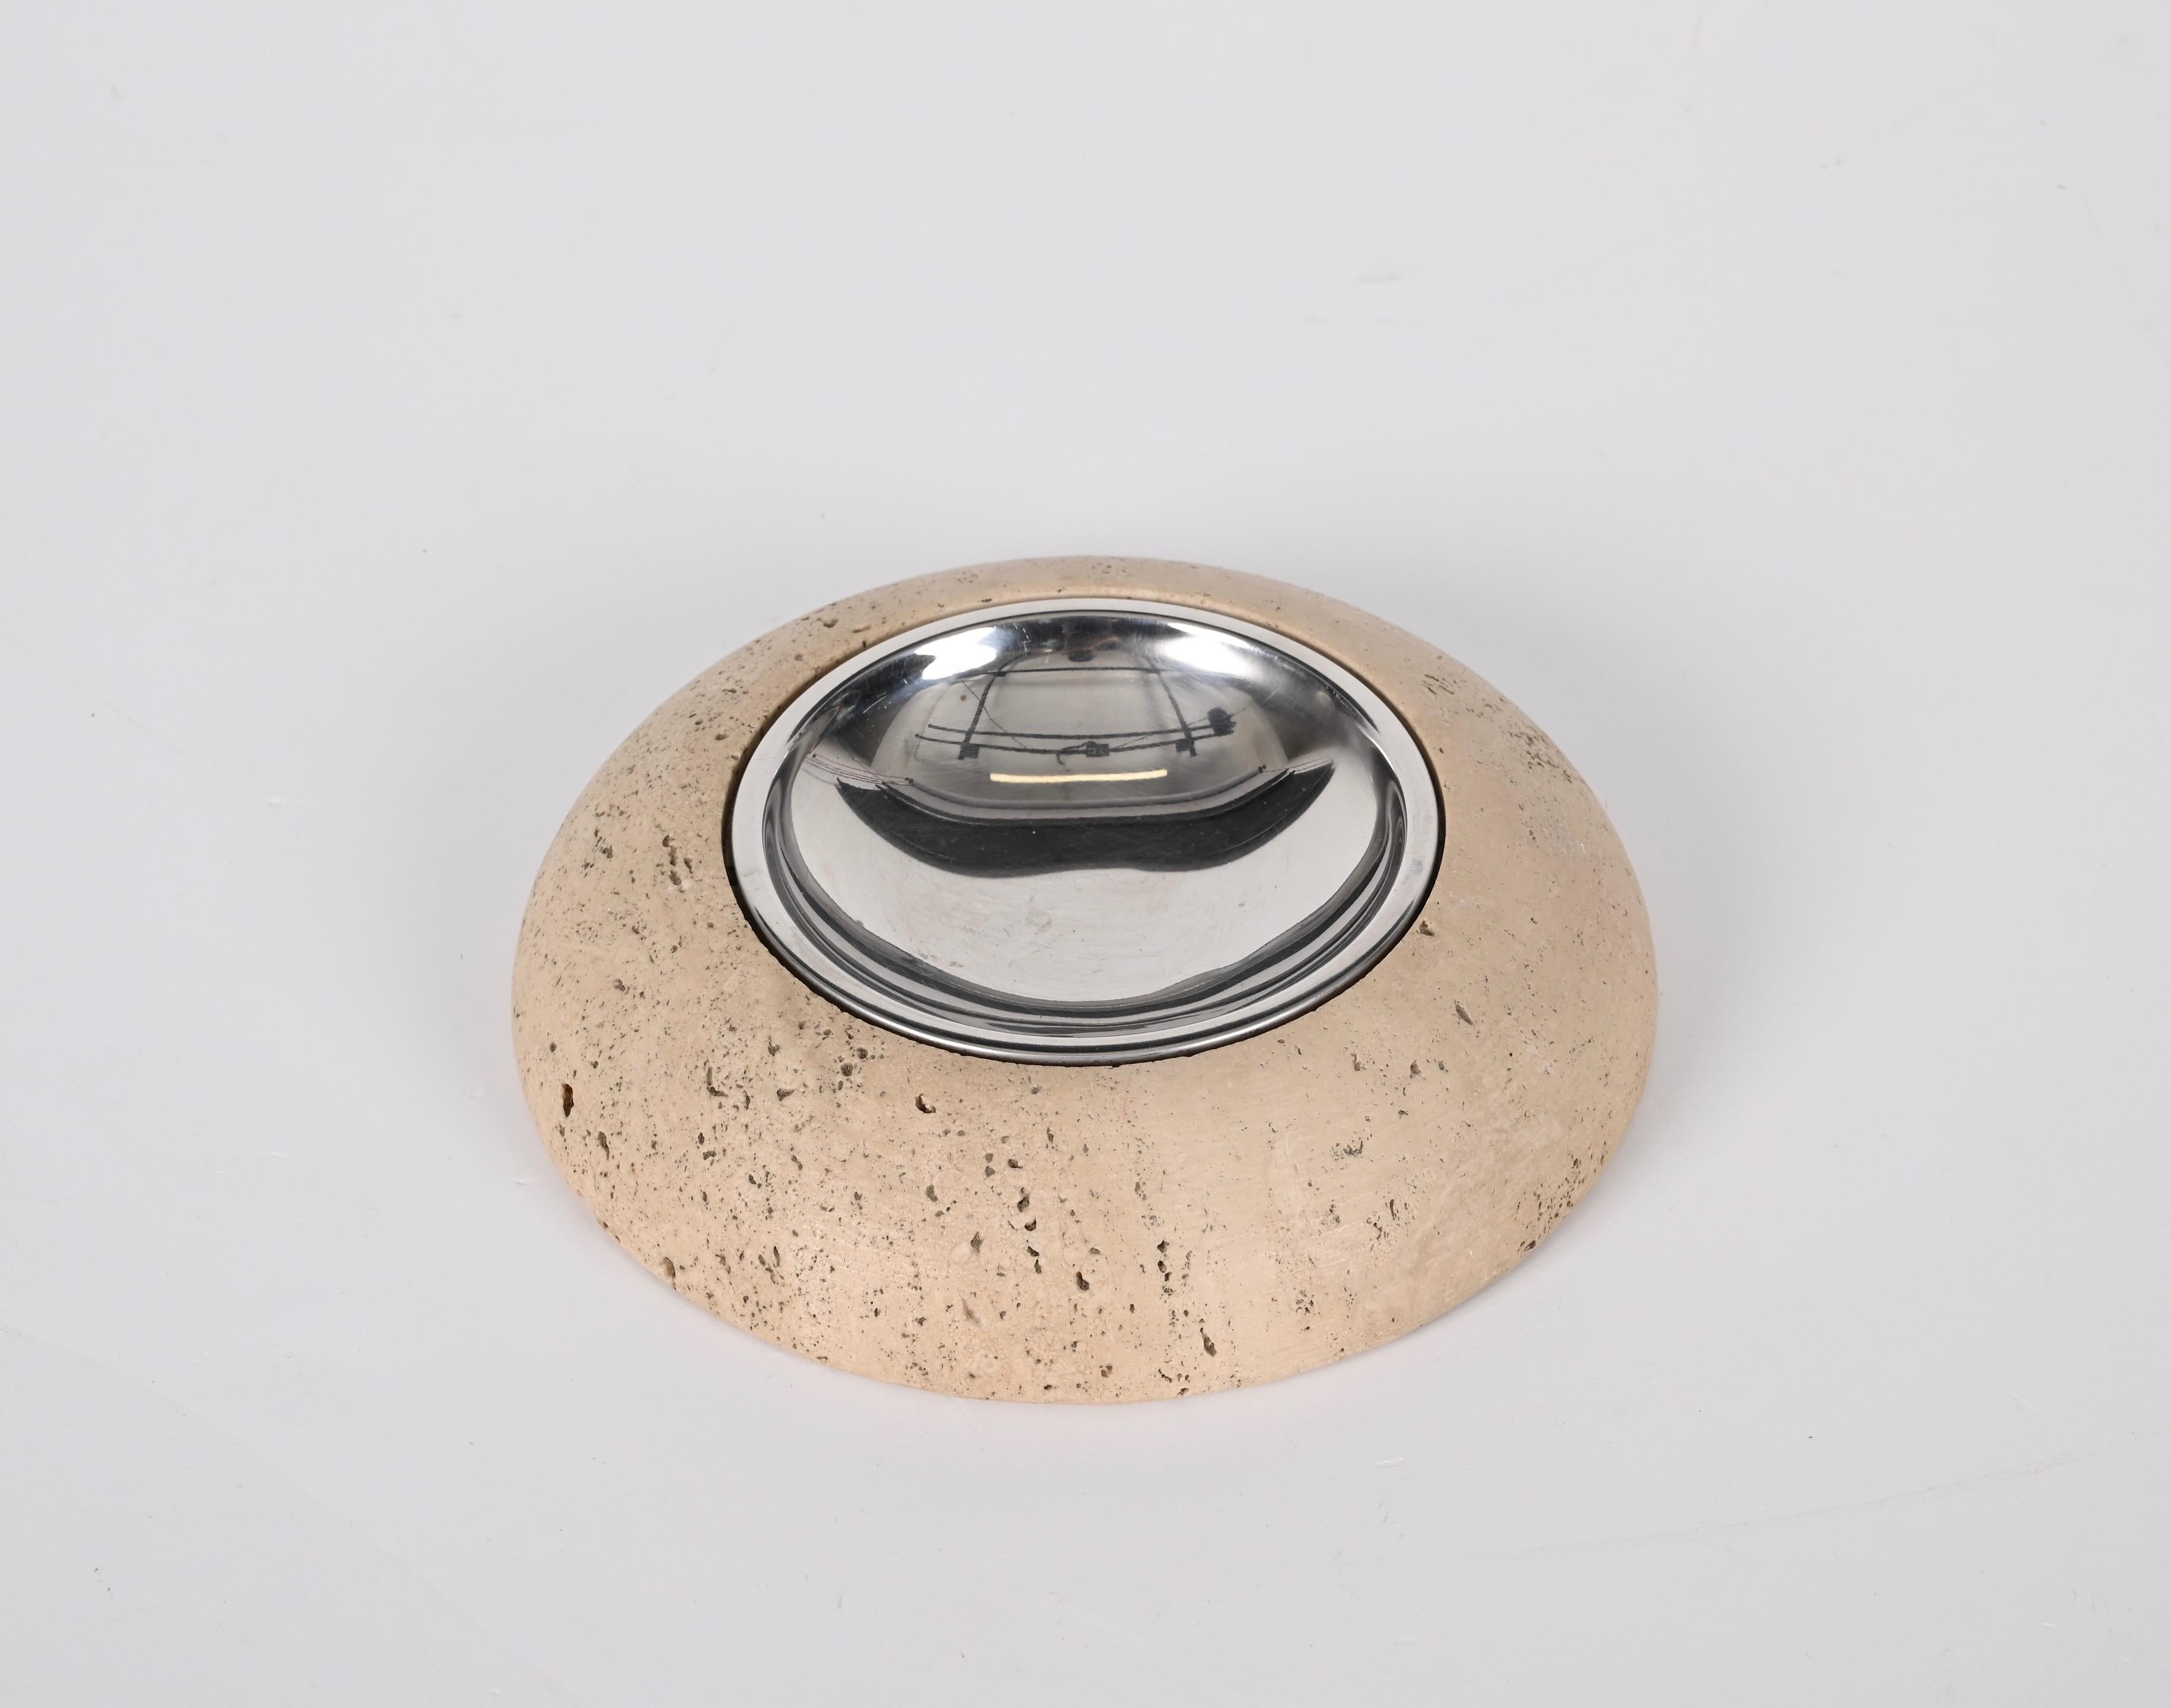 Elegant midcentury rounded white travertine marble ashtray or bowl. Fratelli Mannelli probably designed this fantastic piece in Italy during the 1970s.

This wonderful item is made in full solid Italian Travertine marble and chromed steel that